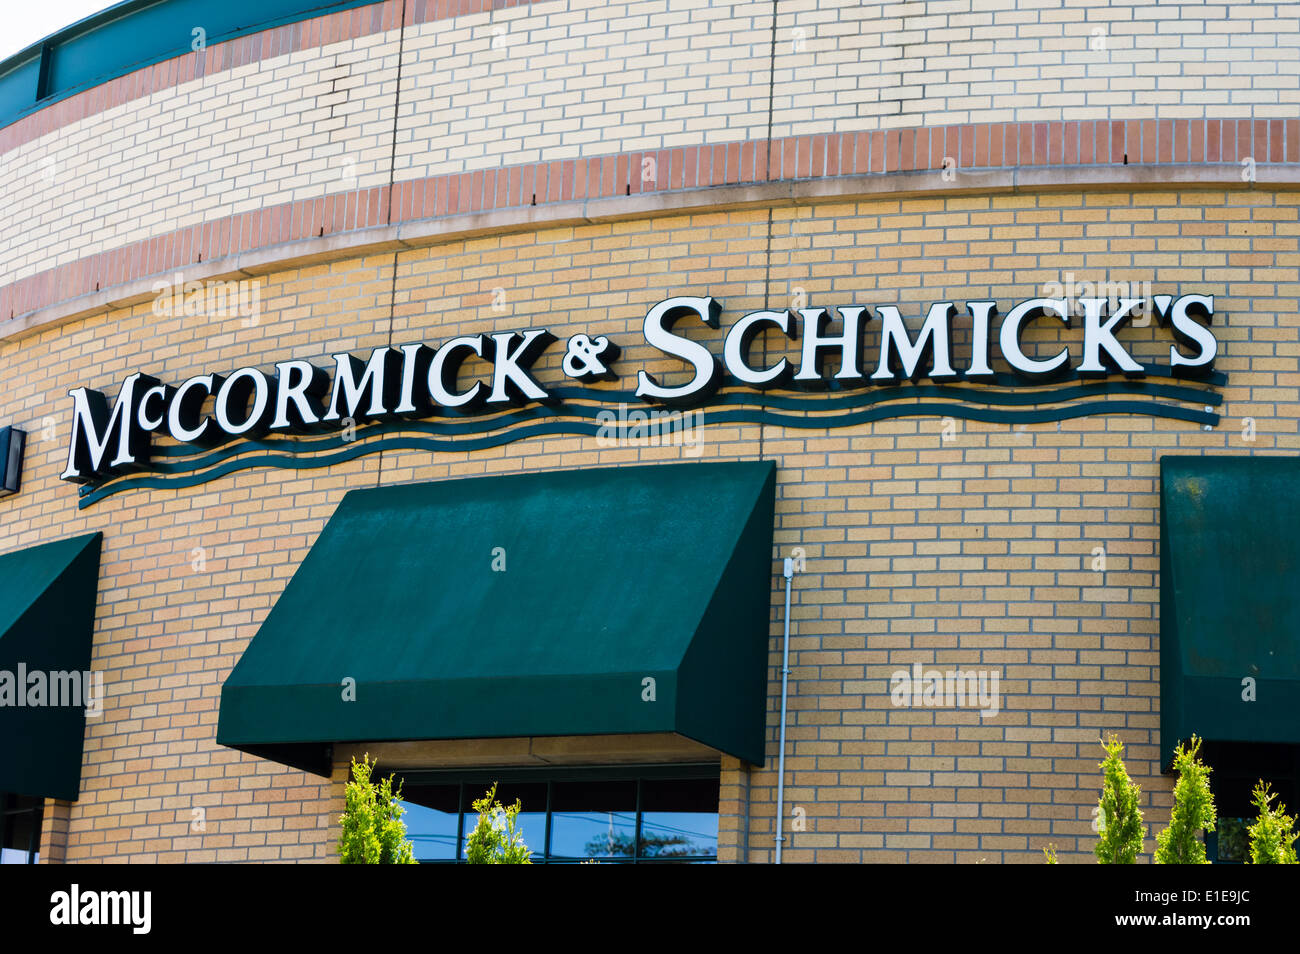 McCormick & Schmick's restaurant is a chain restaurant with a seafood focused menu. Stock Photo